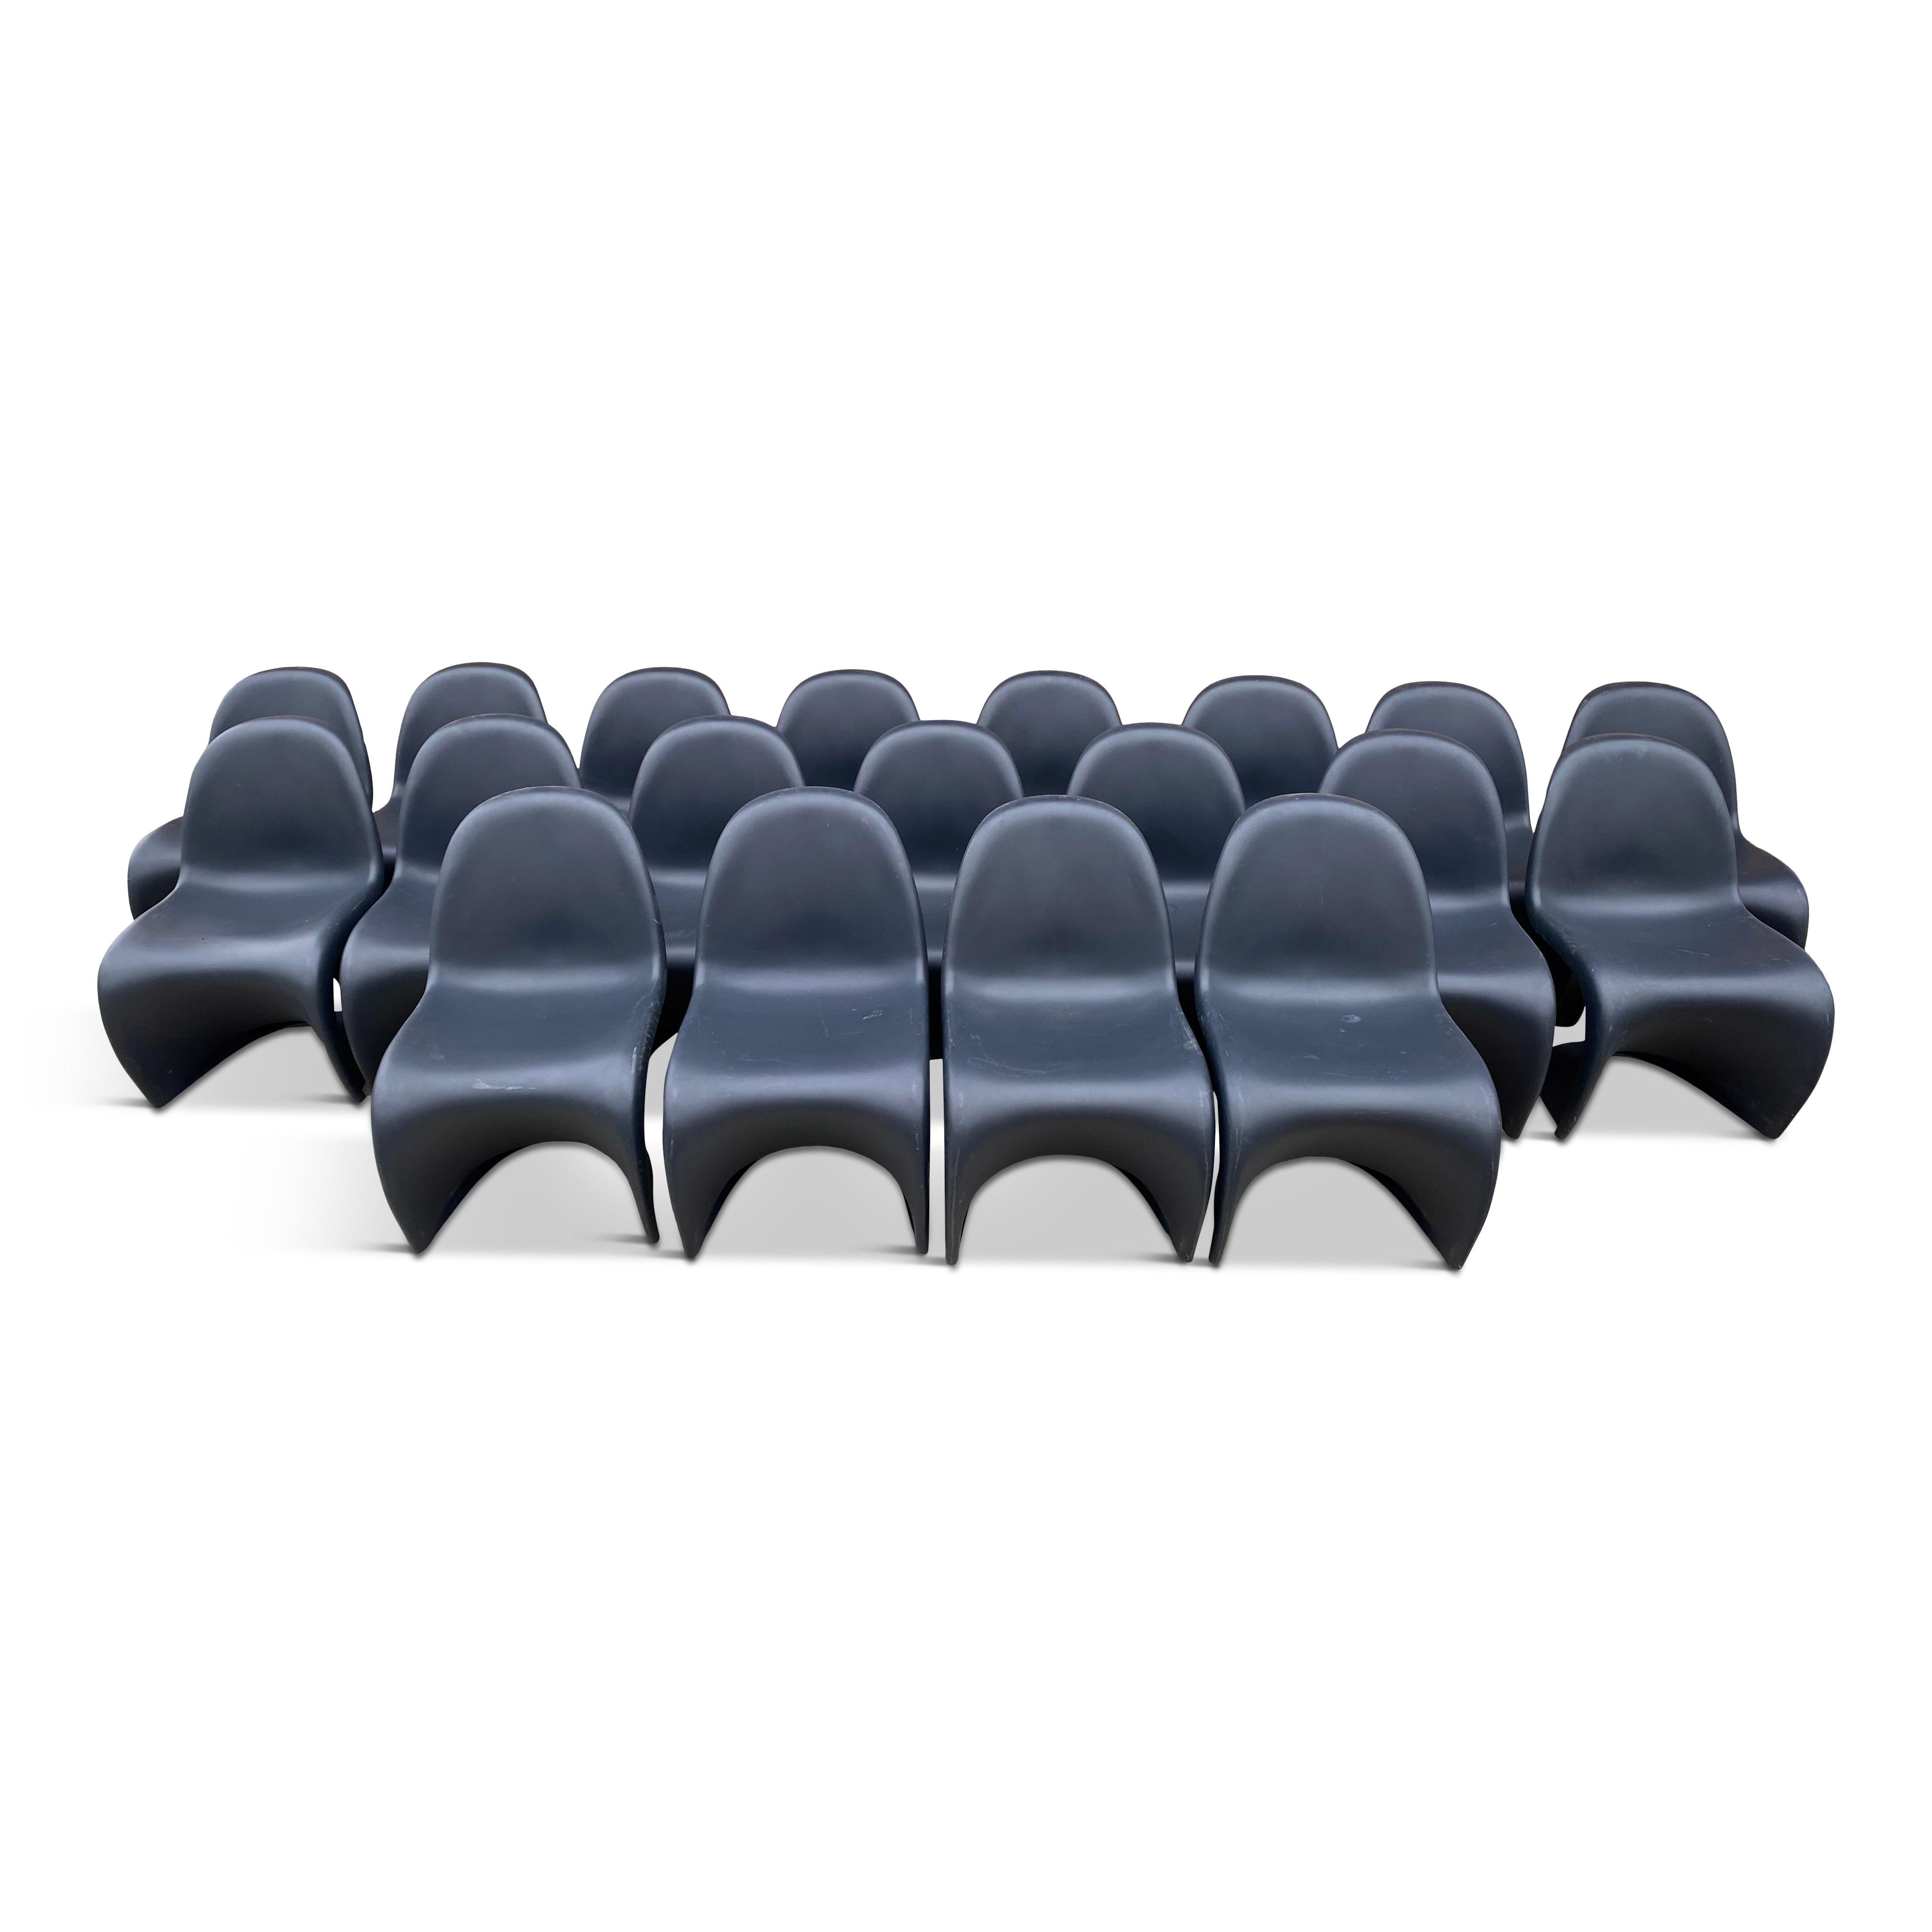 Scandinavian Modern Large Group of Verner Panton S Chairs for Vitra